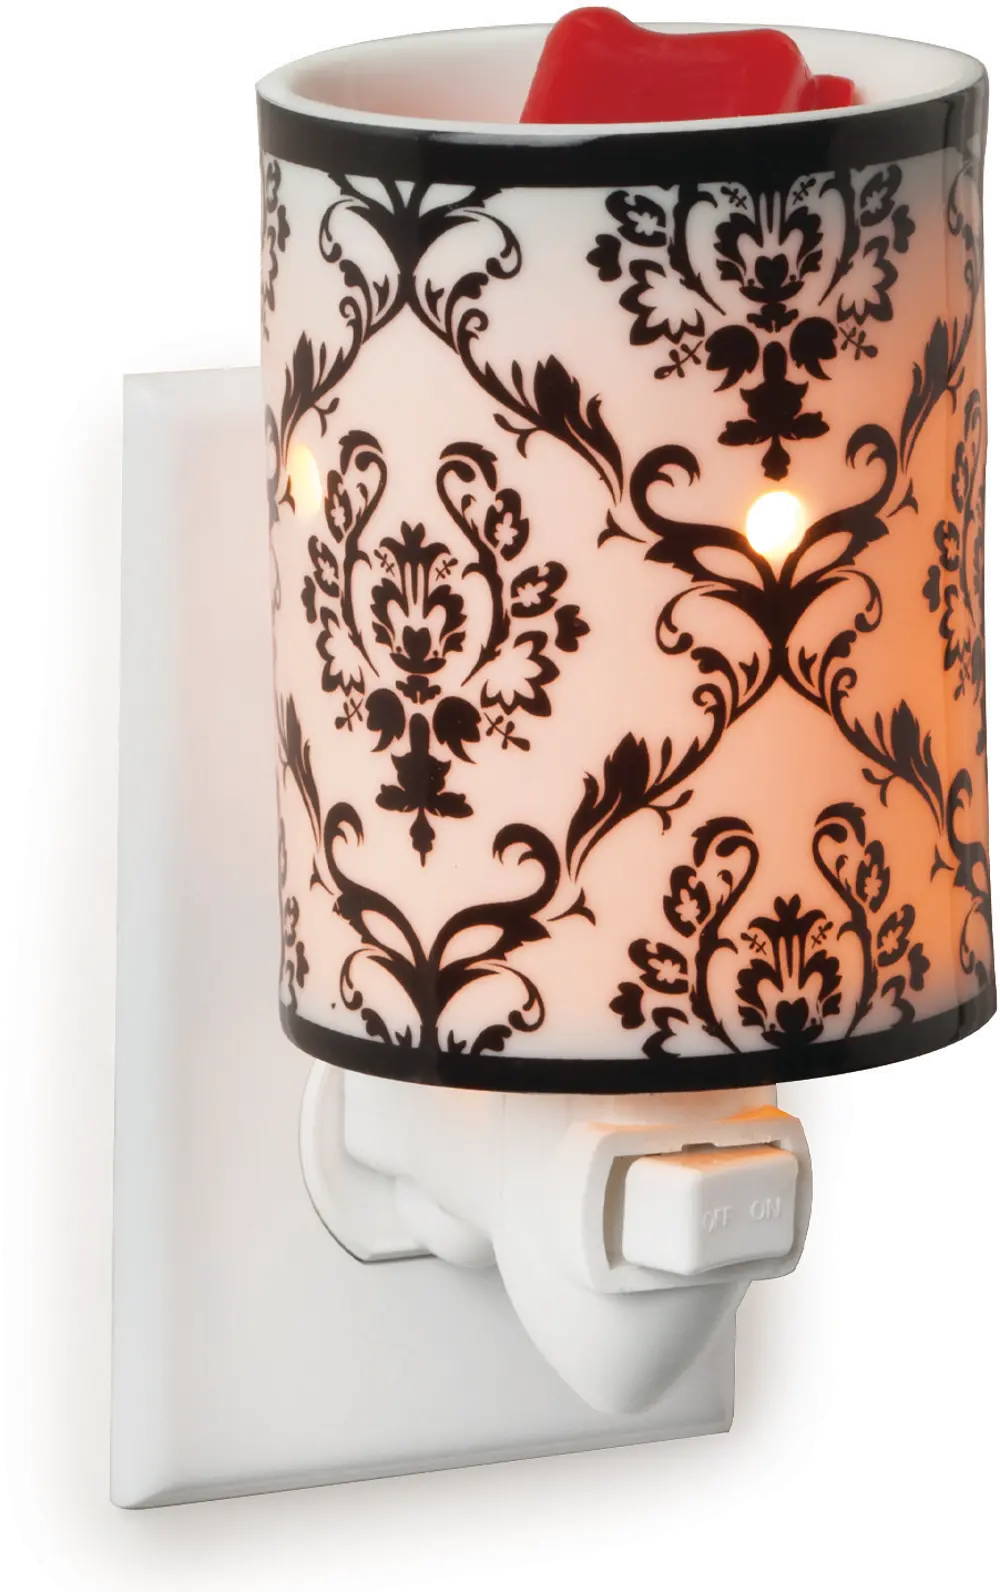 Black and White Damask Pluggable Fragrance Warmer - Candle Warmers-1